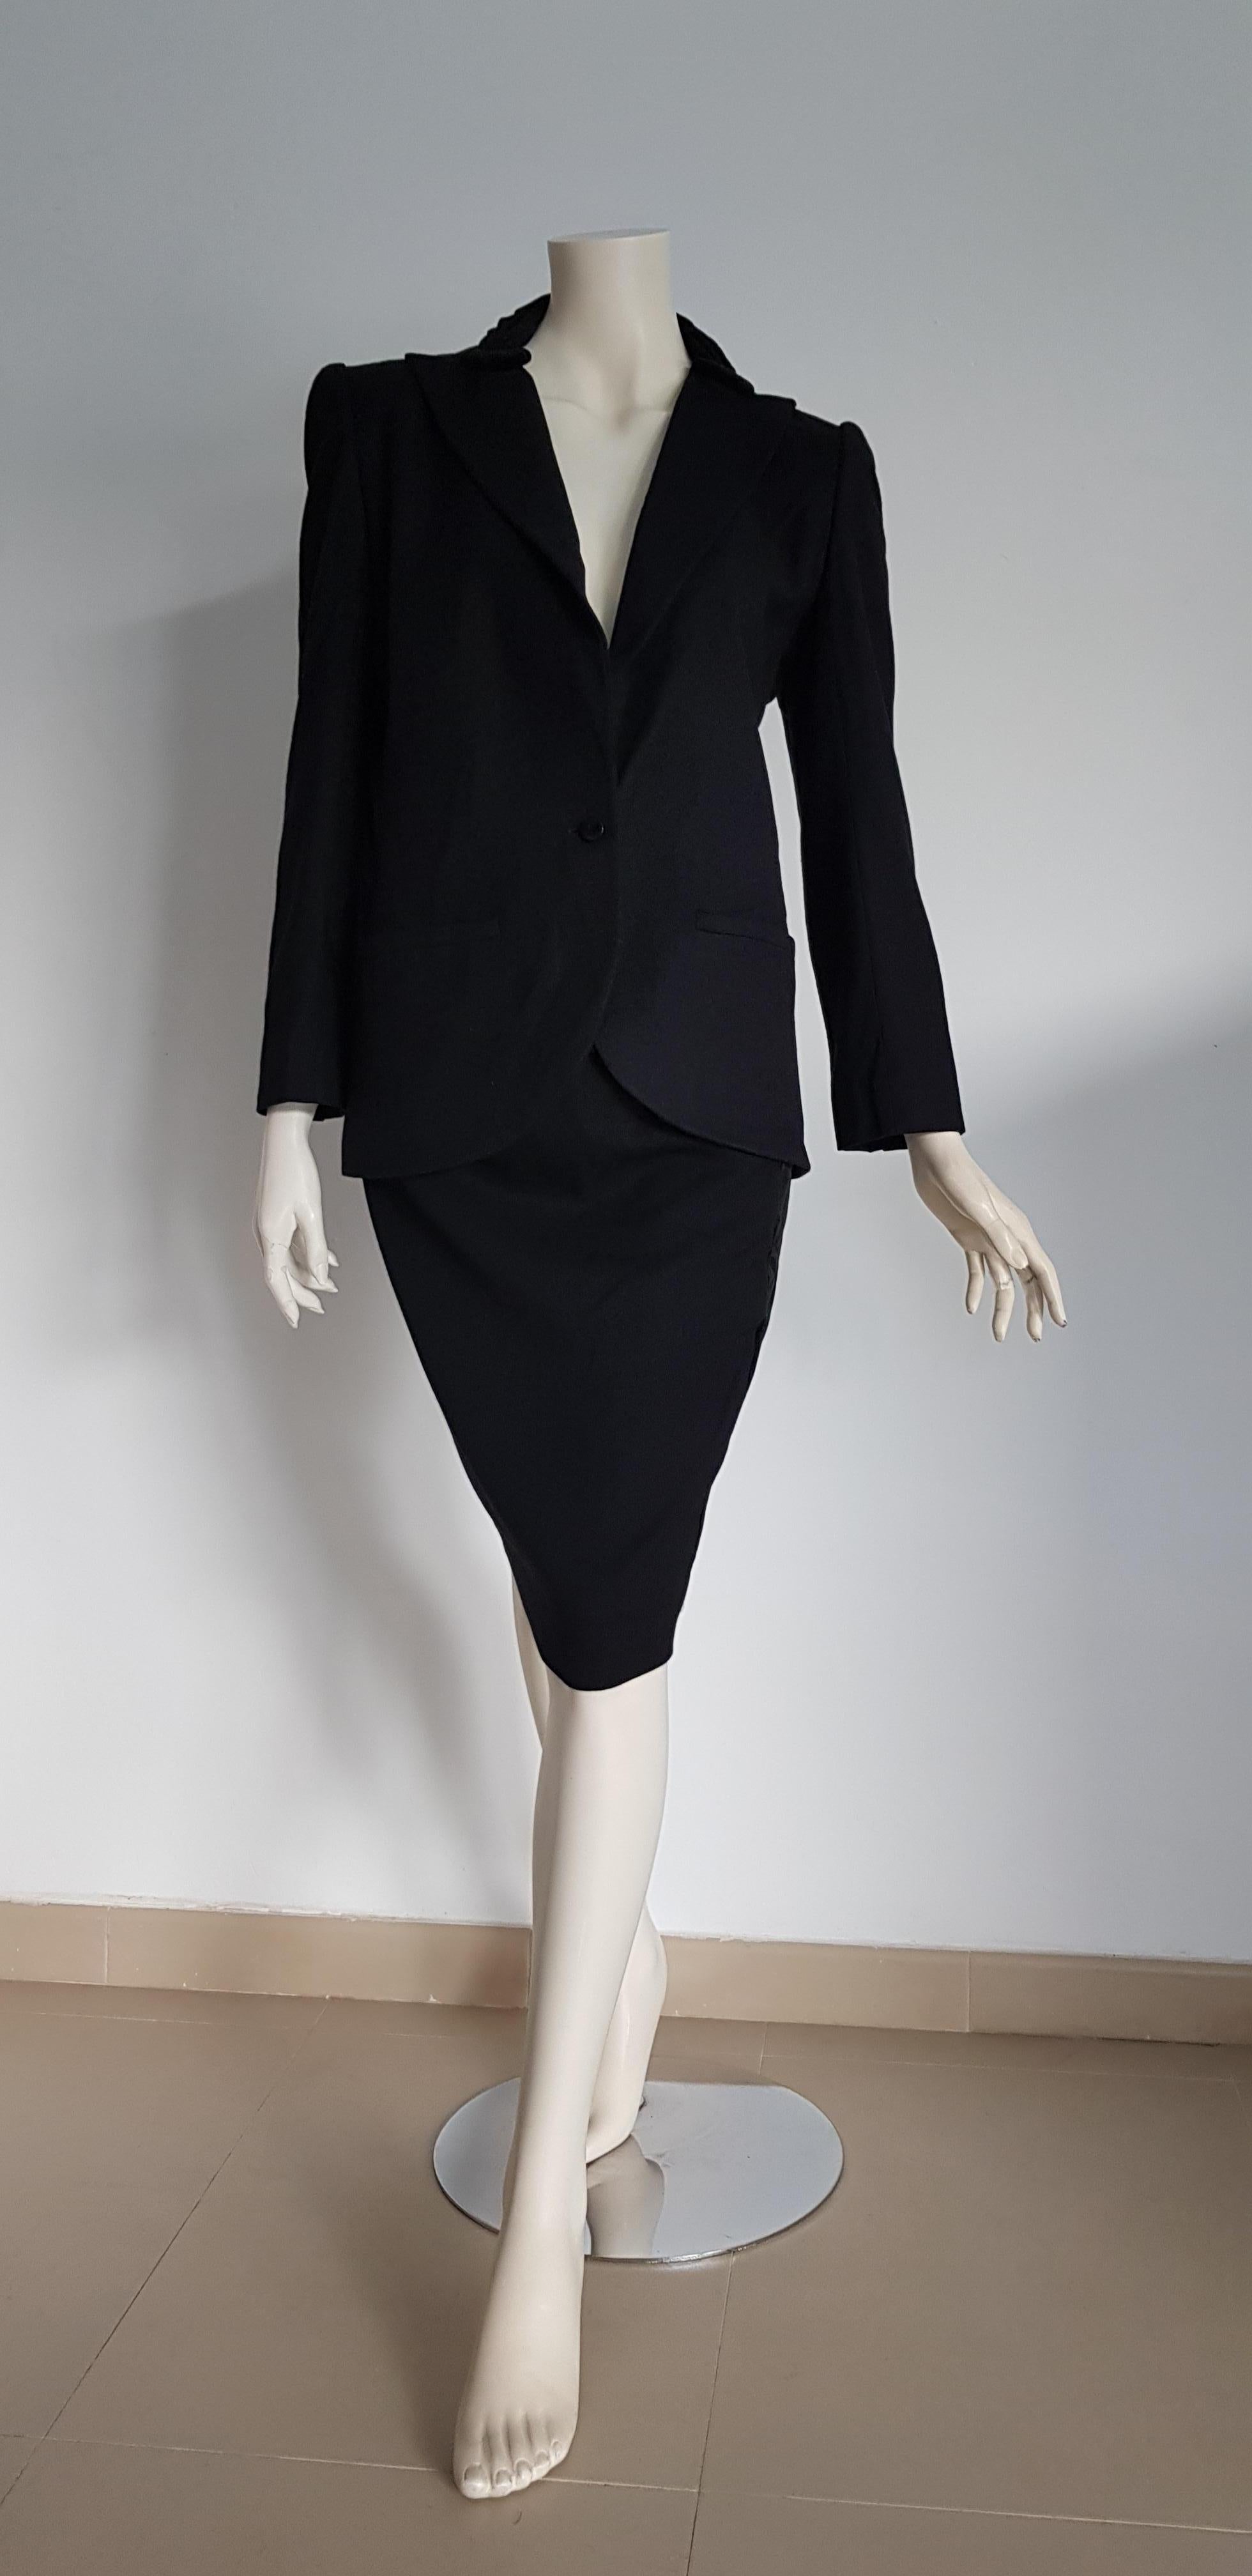 VALENTINO black cashmere embellished collar jacket velvet wool skirt suit - Unworn, New
..
SIZE: equivalent to about Small / Medium, please review approx measurements as follows in cm. 
JACKET: lenght 73, chest underarm to underarm 50, bust